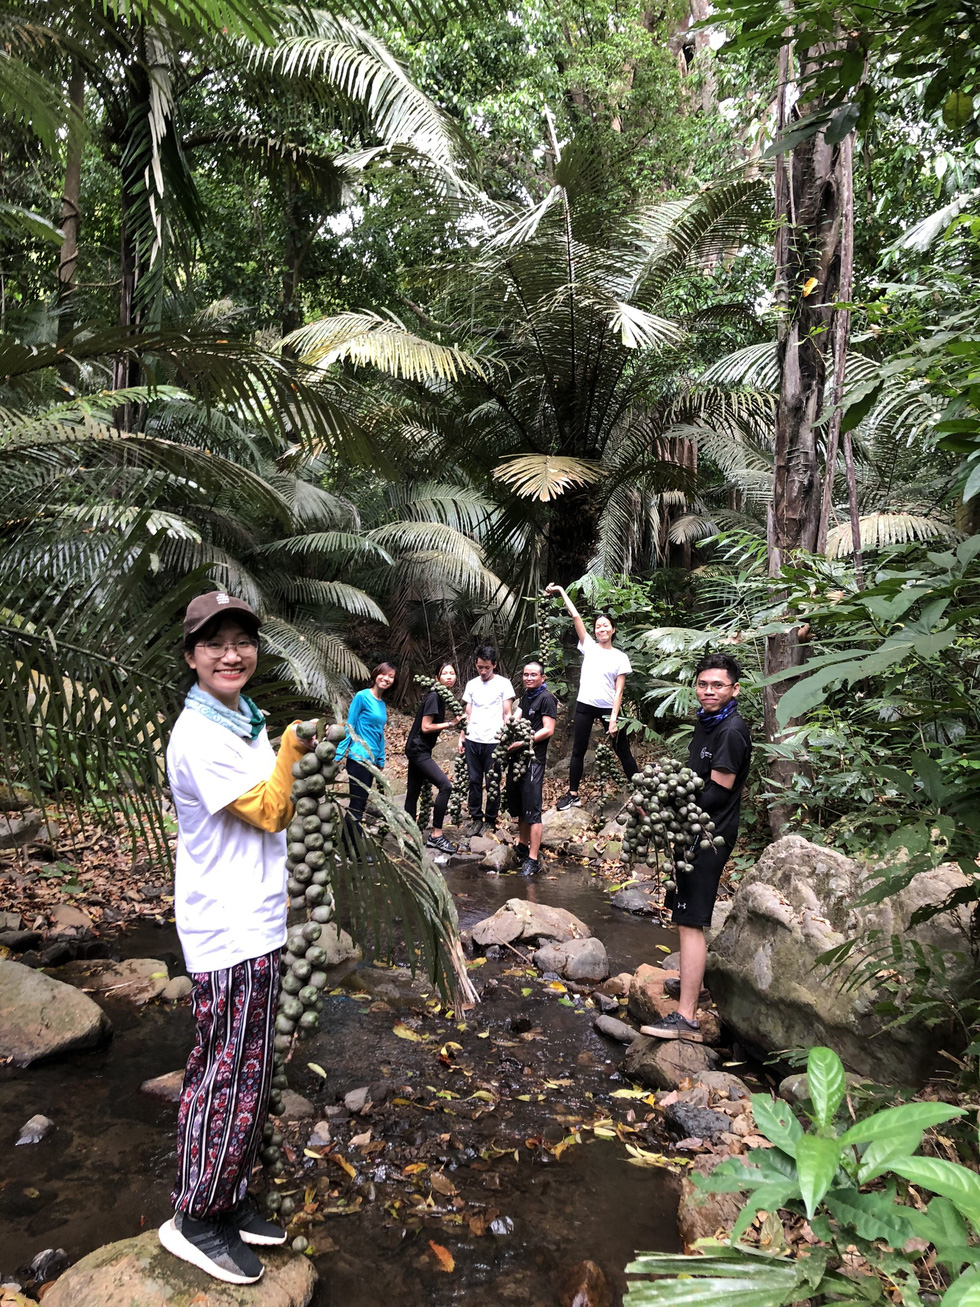 Trekkers explore the arenga pinnata forest, picking the fruit of the arenga pinnata and processing it in a stream. Photo: Vi Thich / Handout via Tuoi Tre